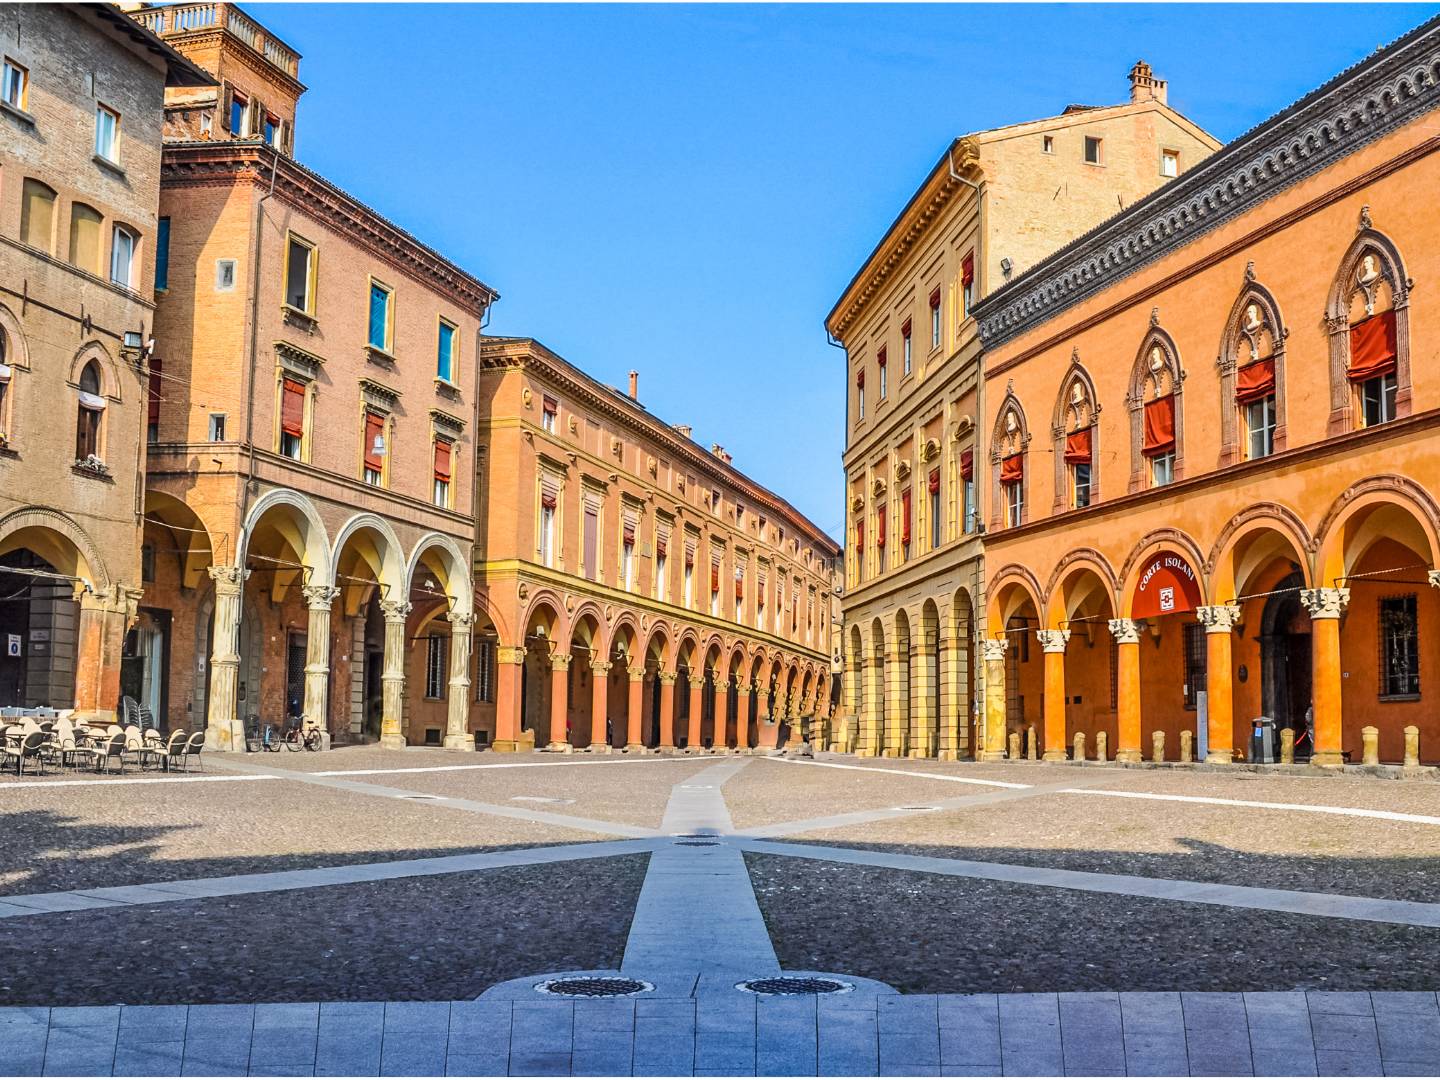 An image showing the porticoes of Bologna historic centre